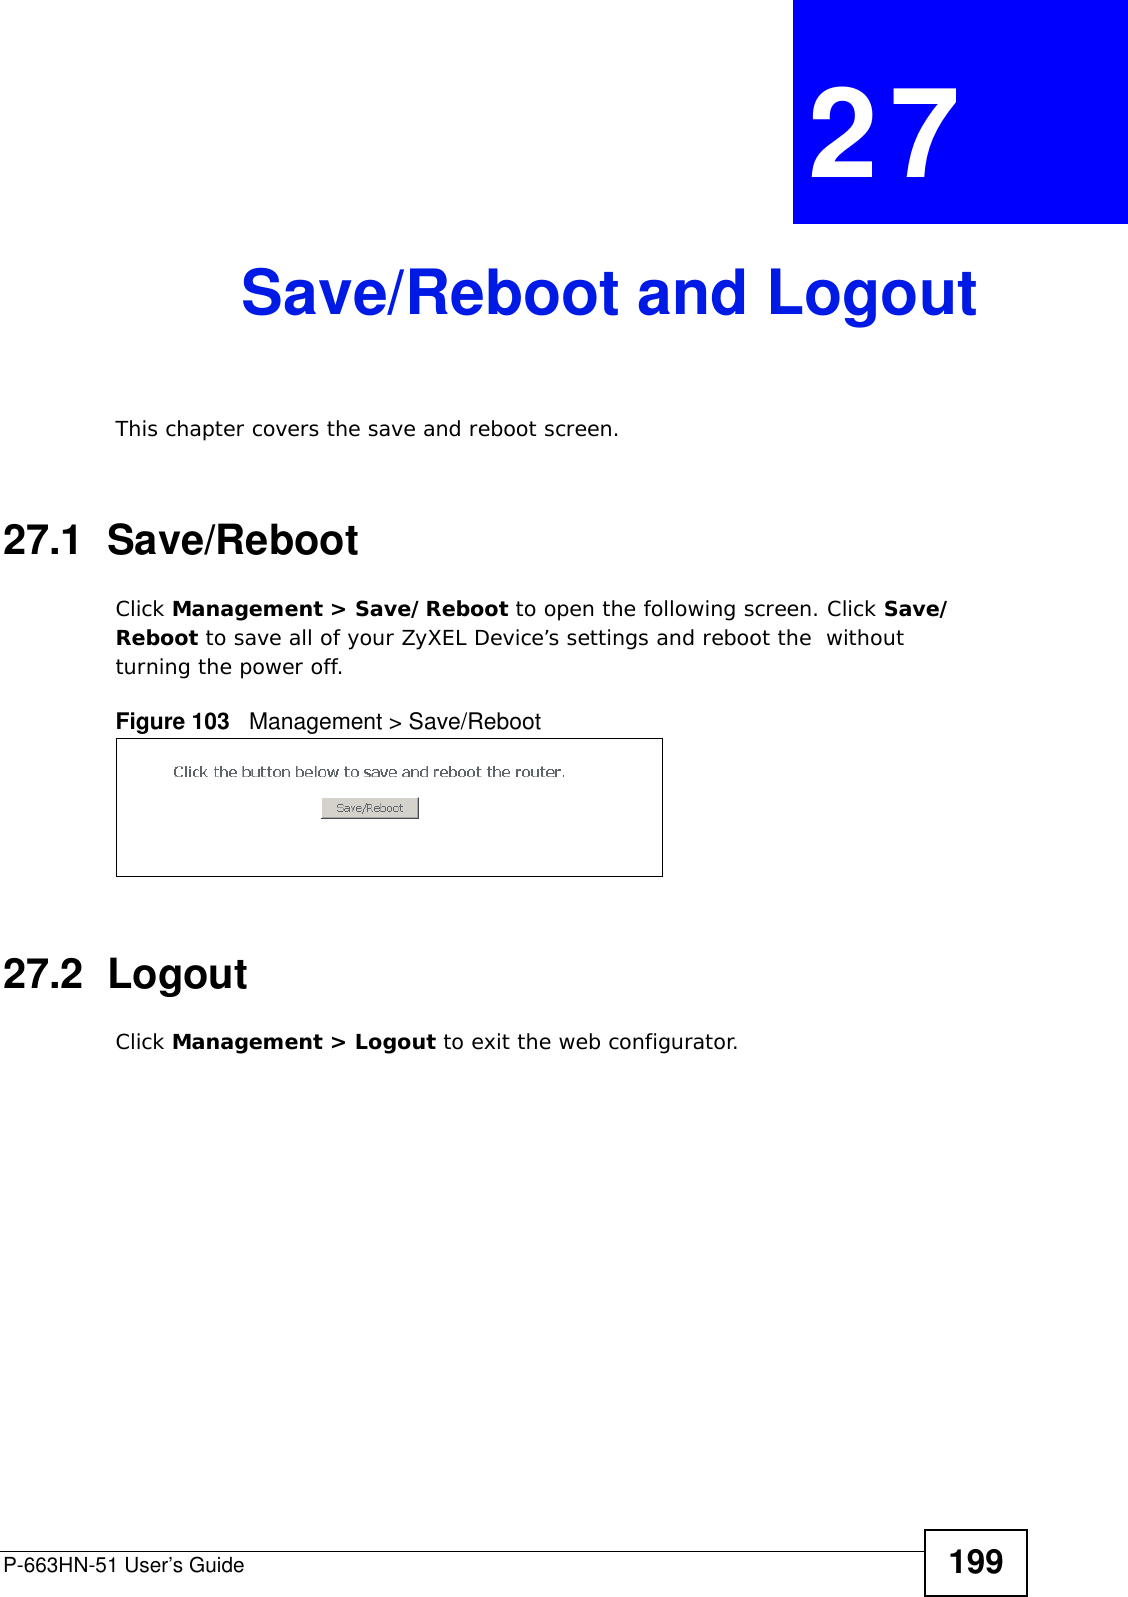 P-663HN-51 User’s Guide 199CHAPTER  27 Save/Reboot and LogoutThis chapter covers the save and reboot screen. 27.1  Save/Reboot Click Management &gt; Save/Reboot to open the following screen. Click Save/Reboot to save all of your ZyXEL Device’s settings and reboot the  without turning the power off. Figure 103   Management &gt; Save/Reboot27.2  LogoutClick Management &gt; Logout to exit the web configurator.